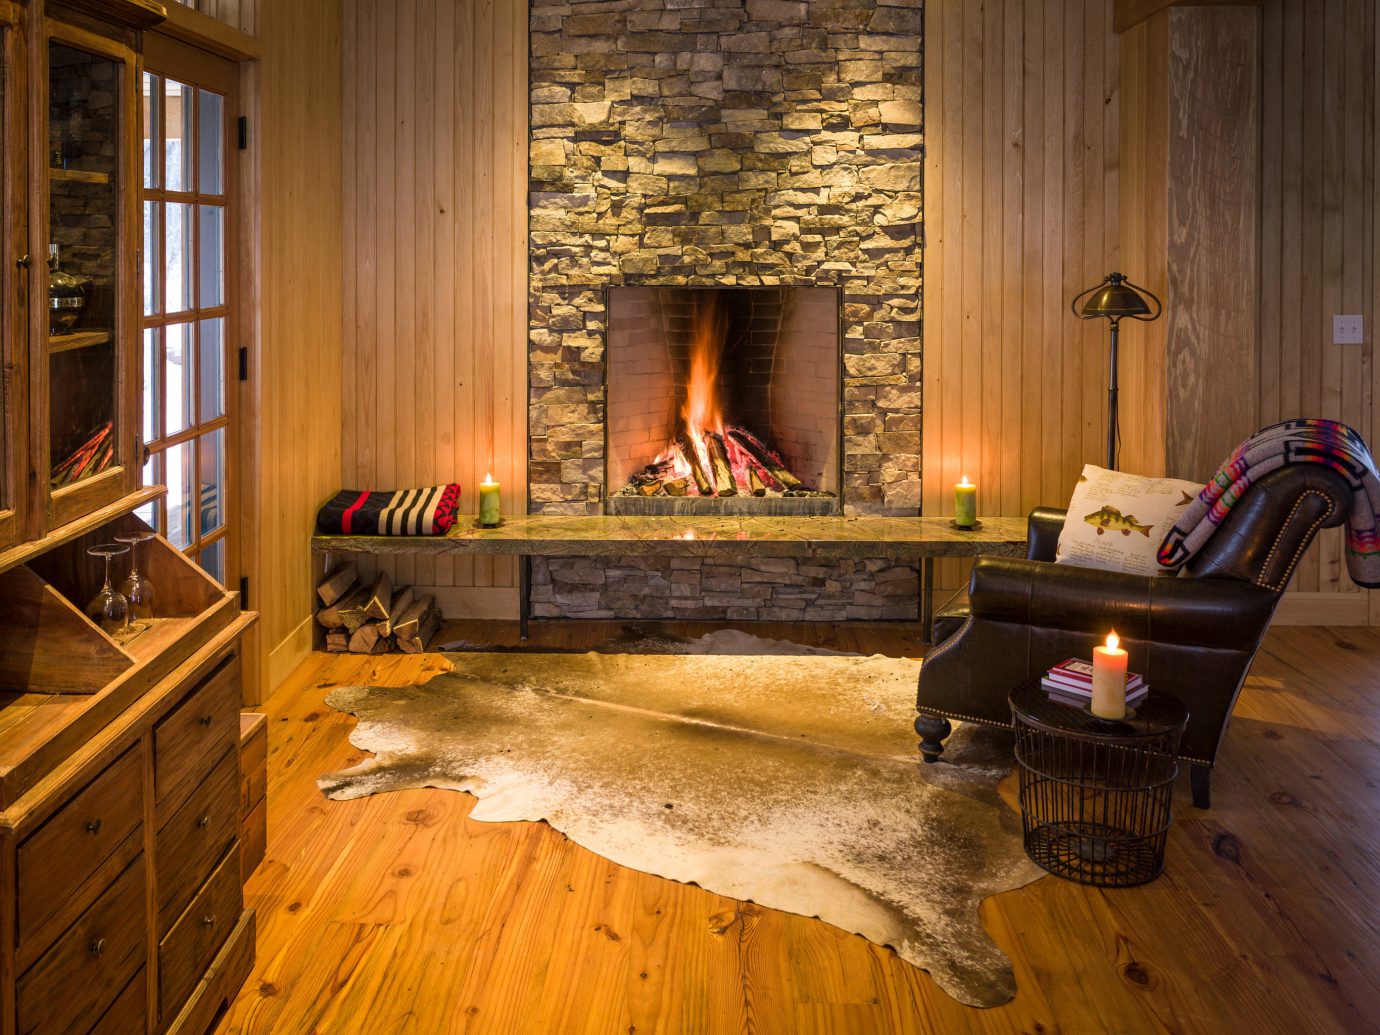 Adventure Country Forest Glamping Living Mountains Outdoors + Adventure Rustic Weekend Getaways Wellness indoor floor room building window property Fireplace home wood hearth hardwood living room house furniture estate cottage wooden wood flooring interior design farmhouse flooring hard